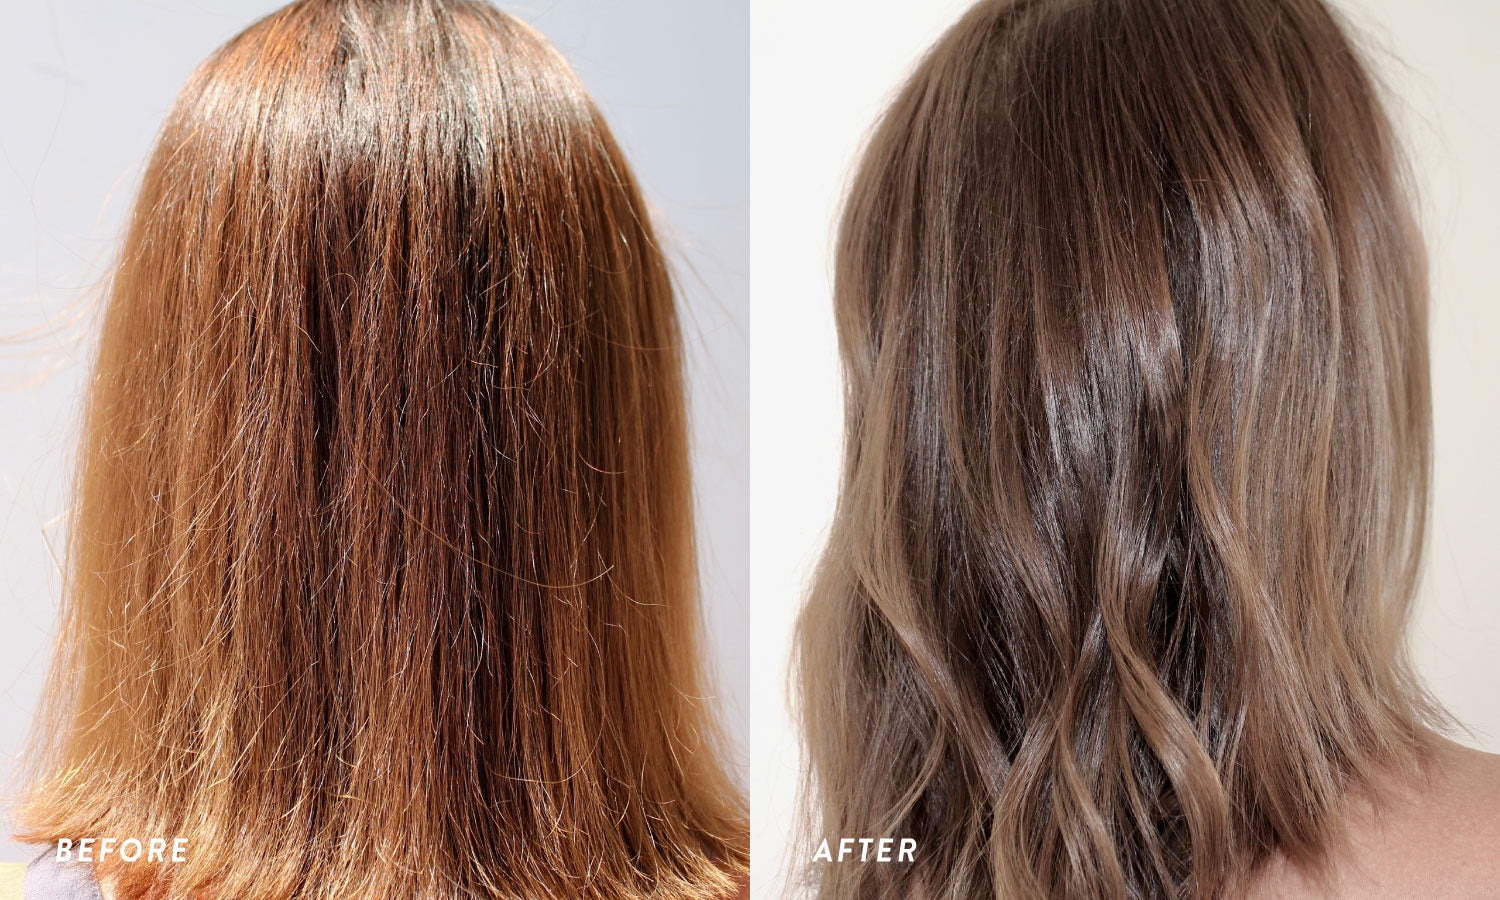 1. "How to Achieve Ash Blonde Hair with Henna" - wide 7